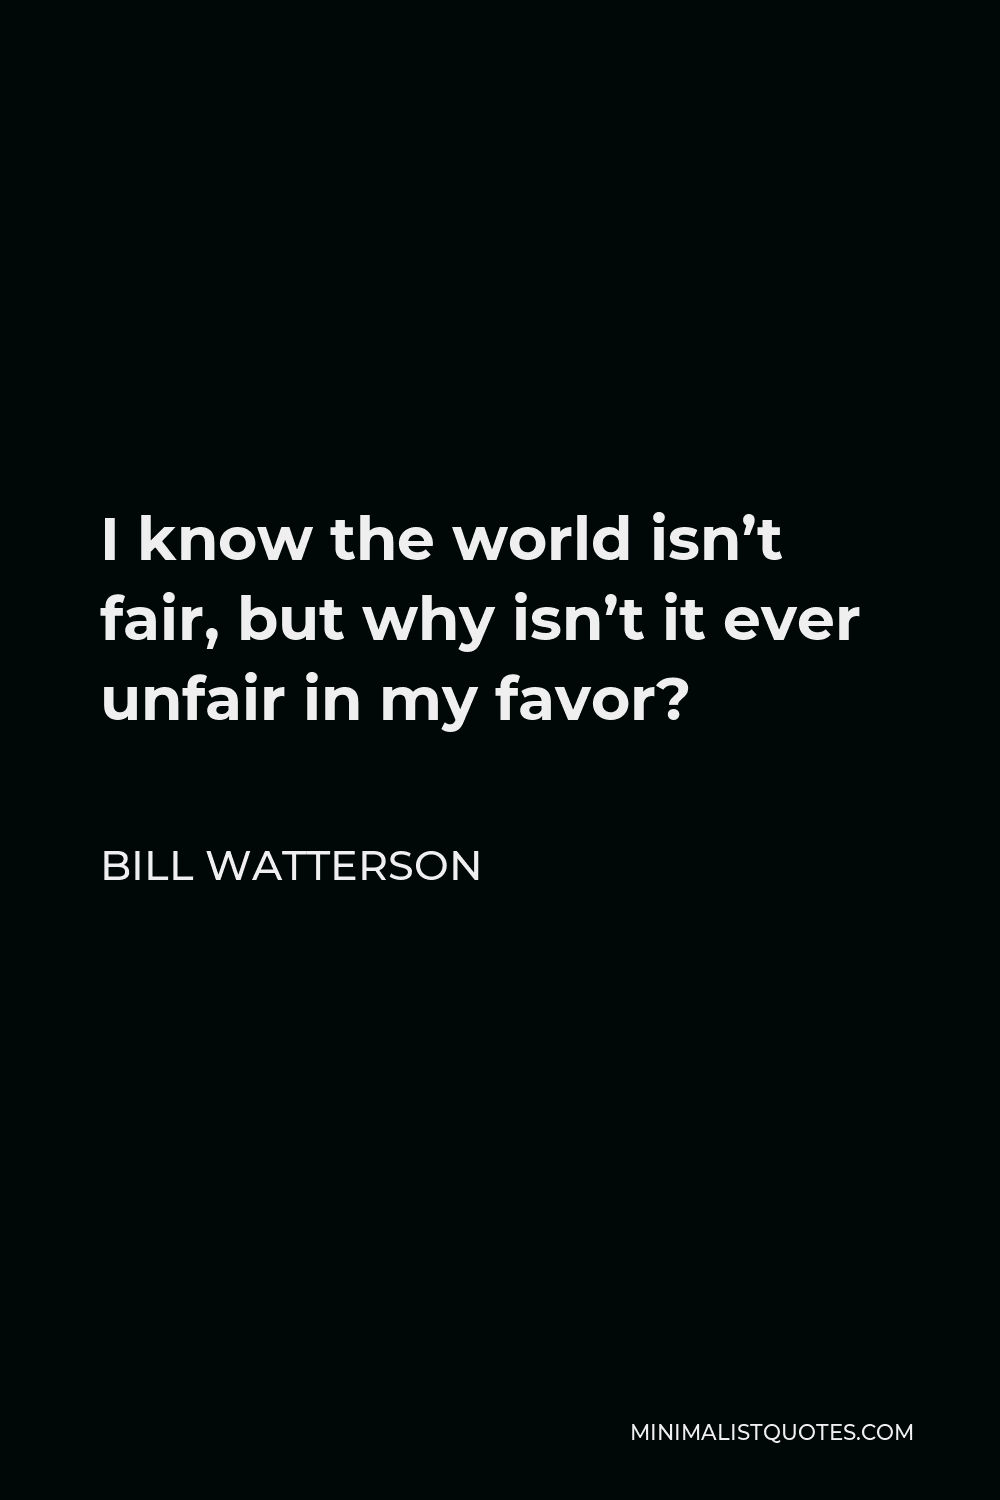 Bill Watterson Quote - I know the world isn’t fair, but why isn’t it ever unfair in my favor?